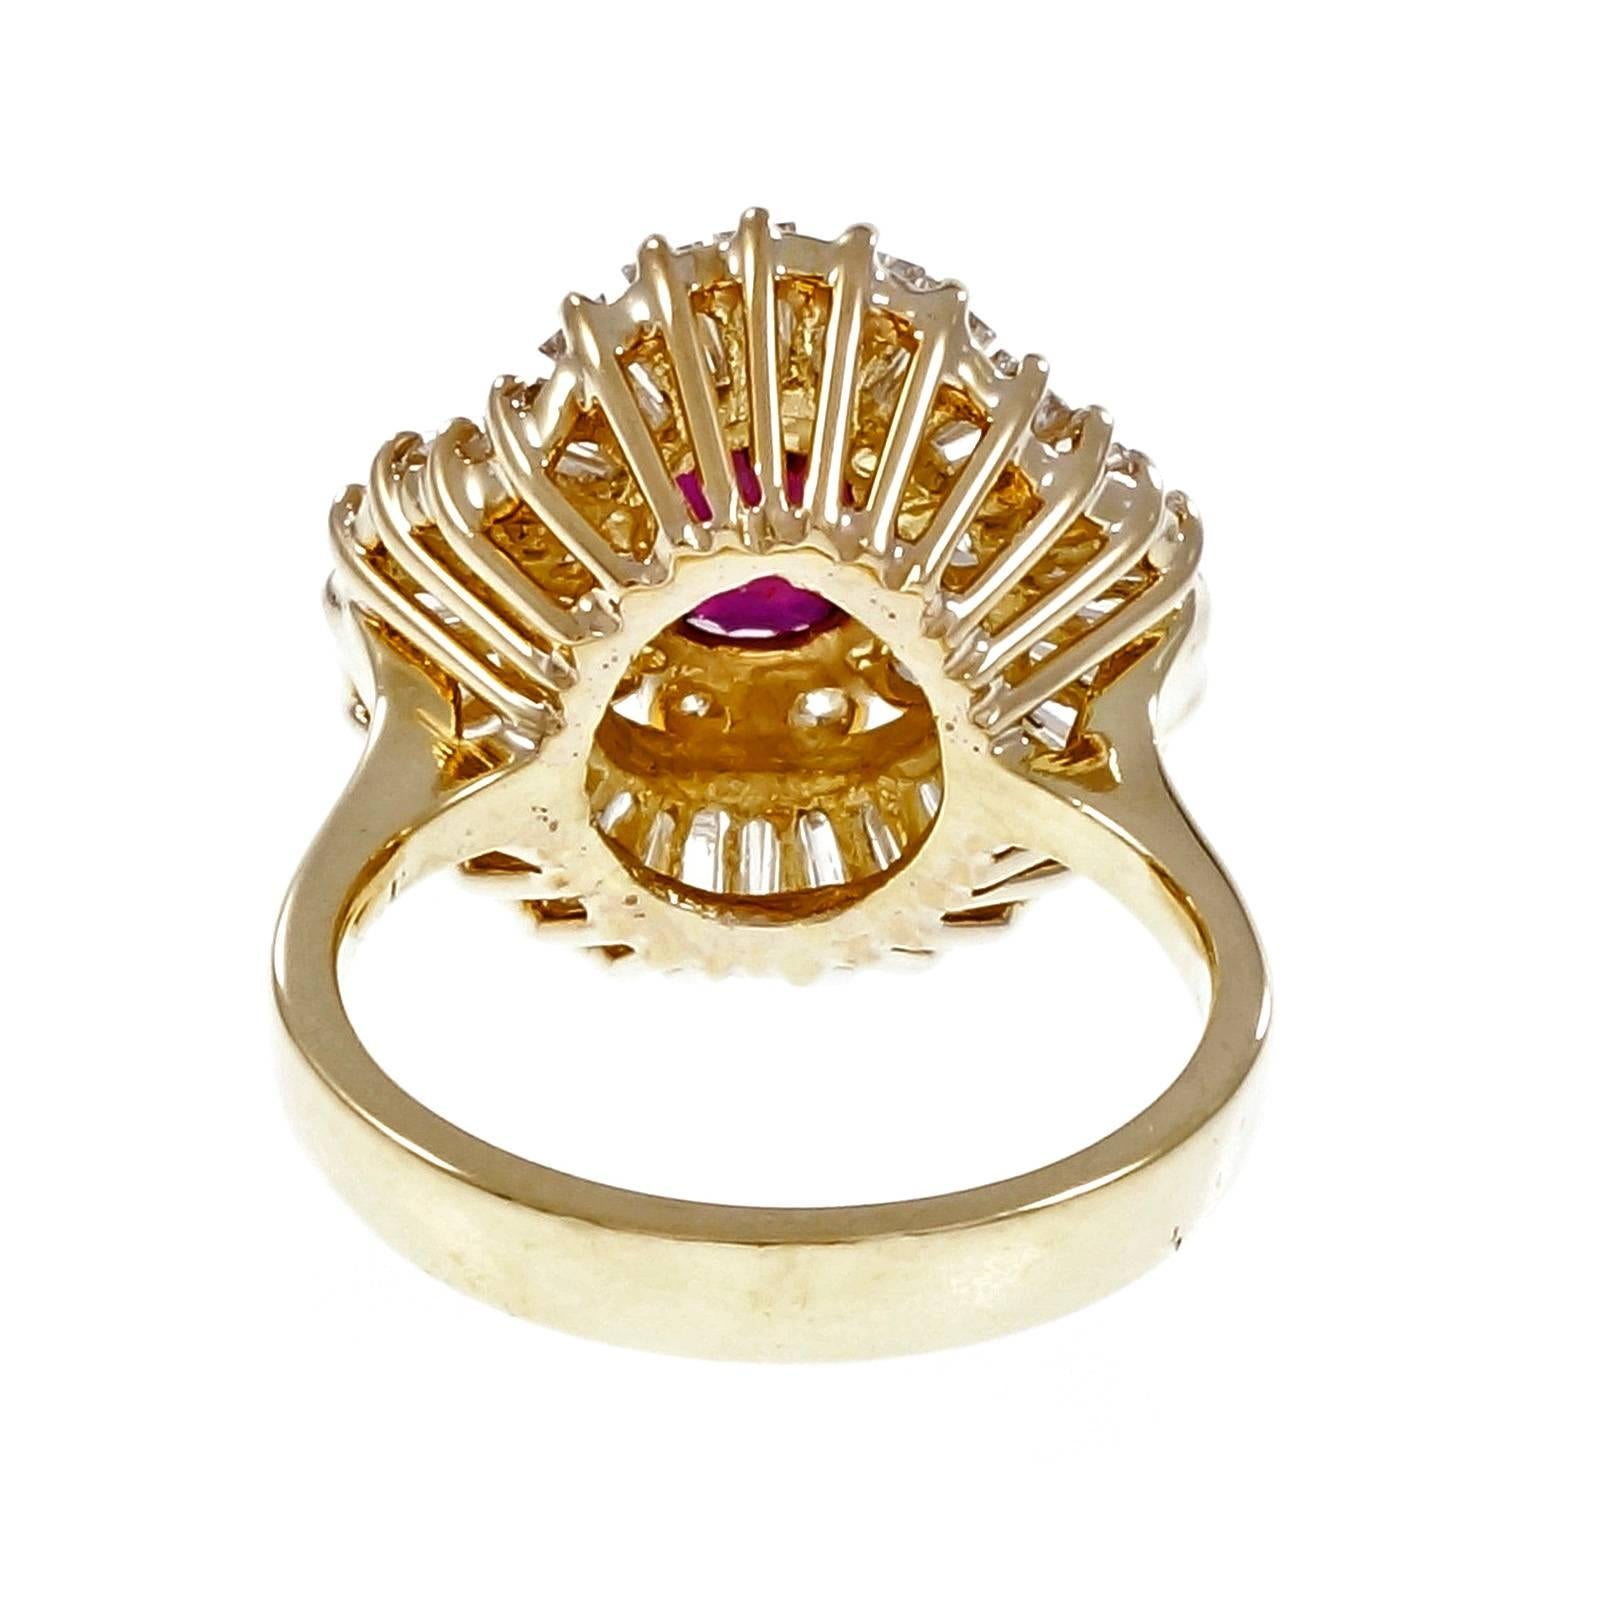 1960’s Ruby Diamond Gold Ballerina Cocktail Ring. Ballerina style handmade 18k yellow gold ring with a vivid bright red Ruby GIA certified natural simple heat only. Bright white baguette and round diamonds.

1 oval red Ruby, approx. total weight